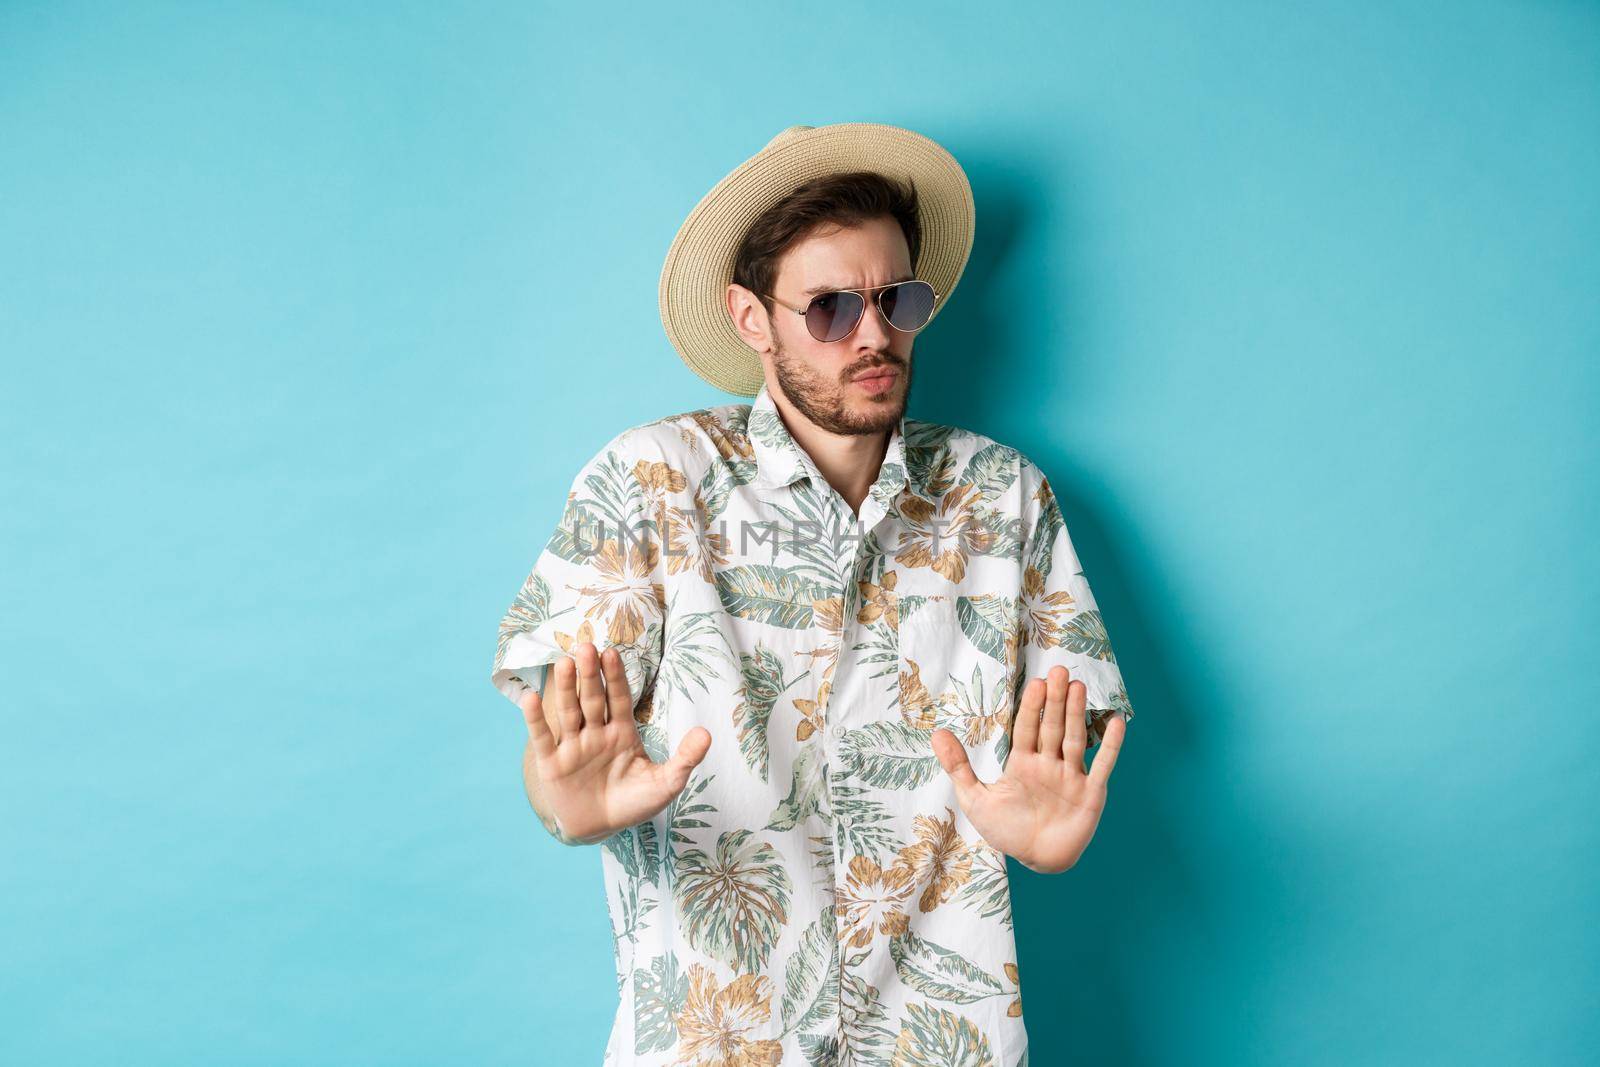 Alarmed tourist asking to stay away, step back from something cringe, showing rejection gesture, standing in straw hat and hawaiian shirt, blue background by Benzoix